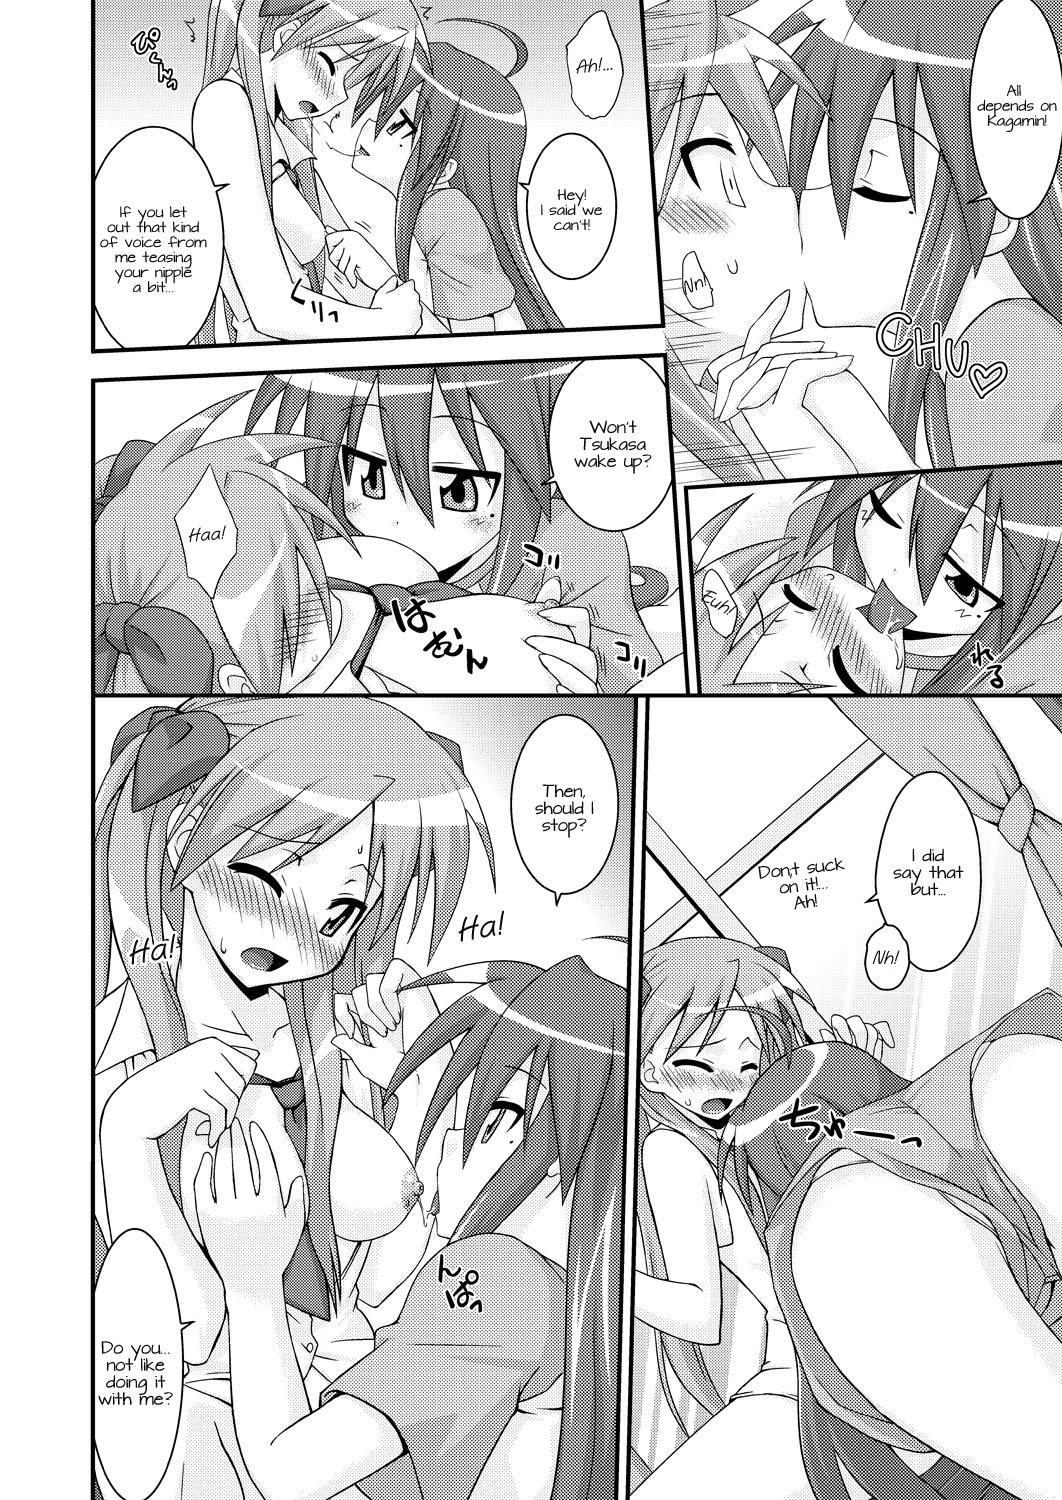 Italian Jam Star - Lucky star Pica - Page 5